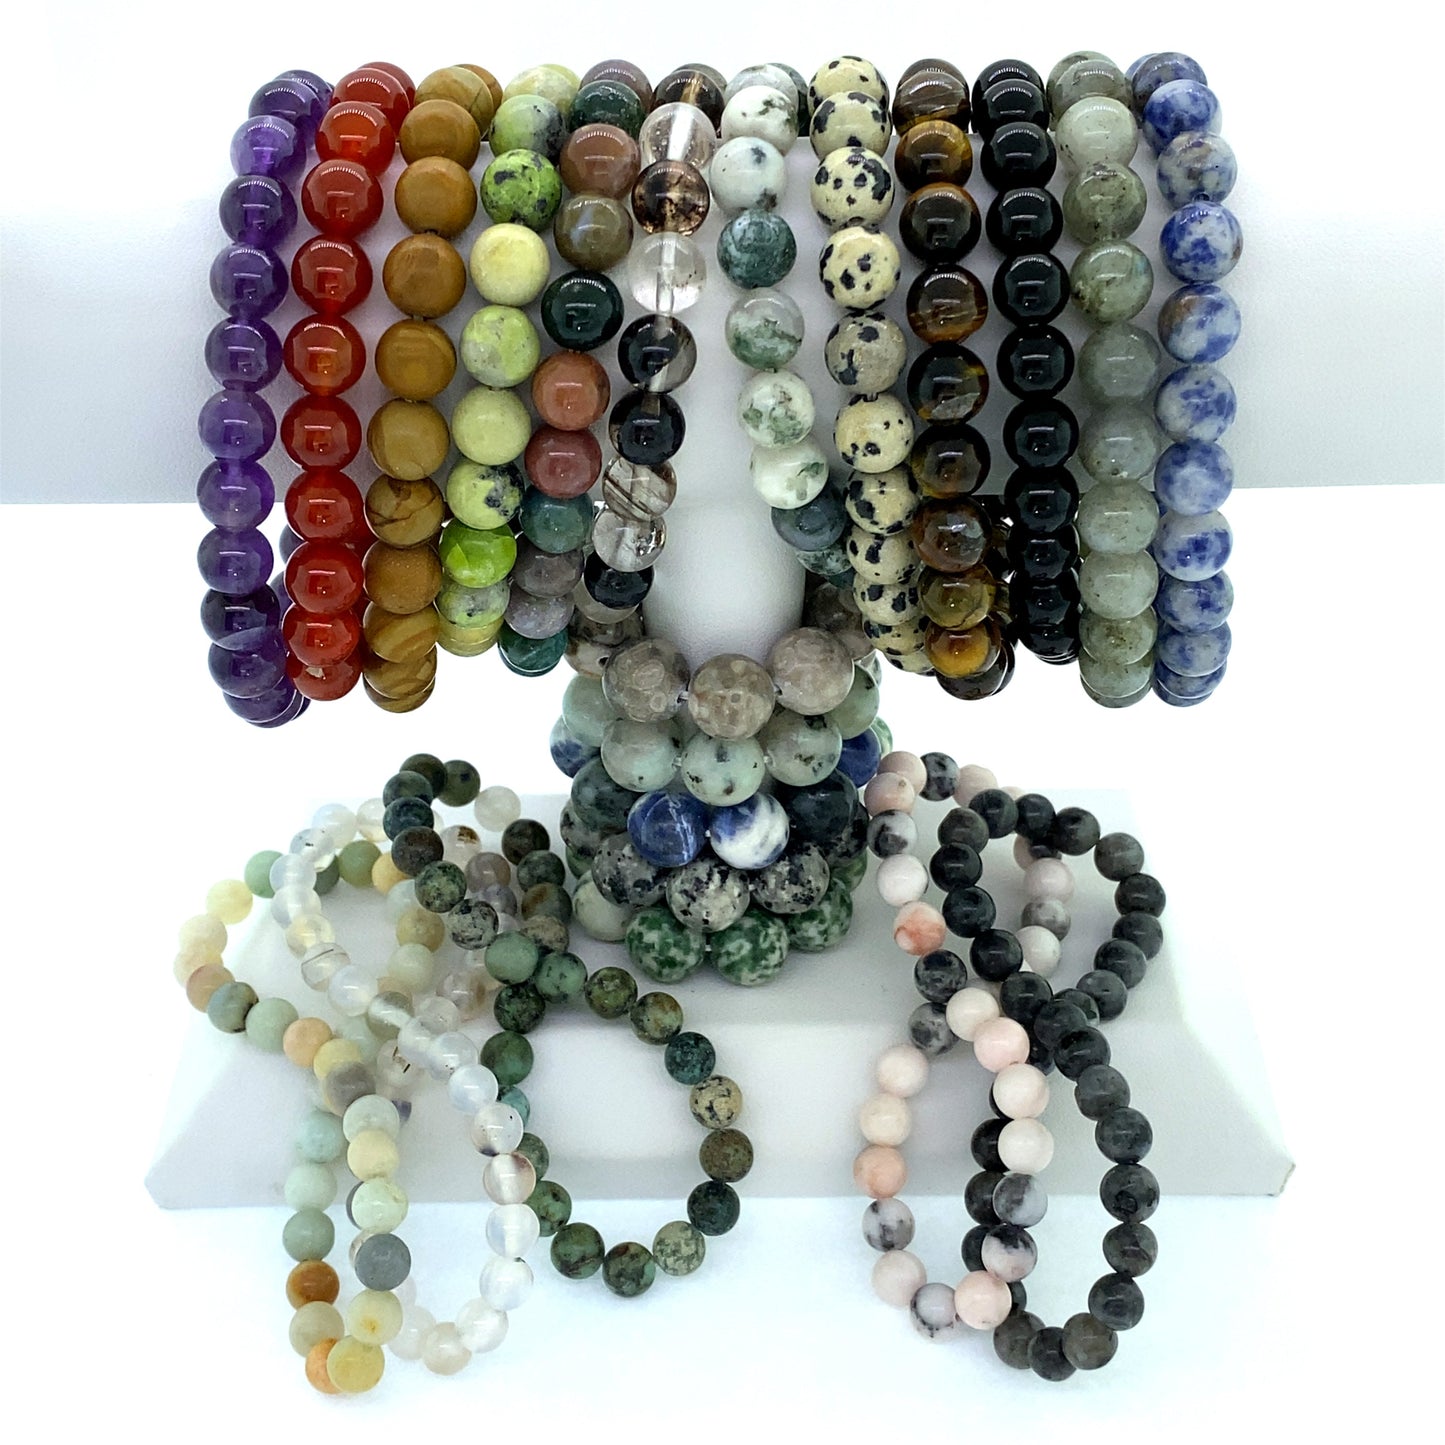 A display of various colorful 4mm Beaded Stone Bracelets arranged on stands, with additional gemstone stackable bracelets draped in front.